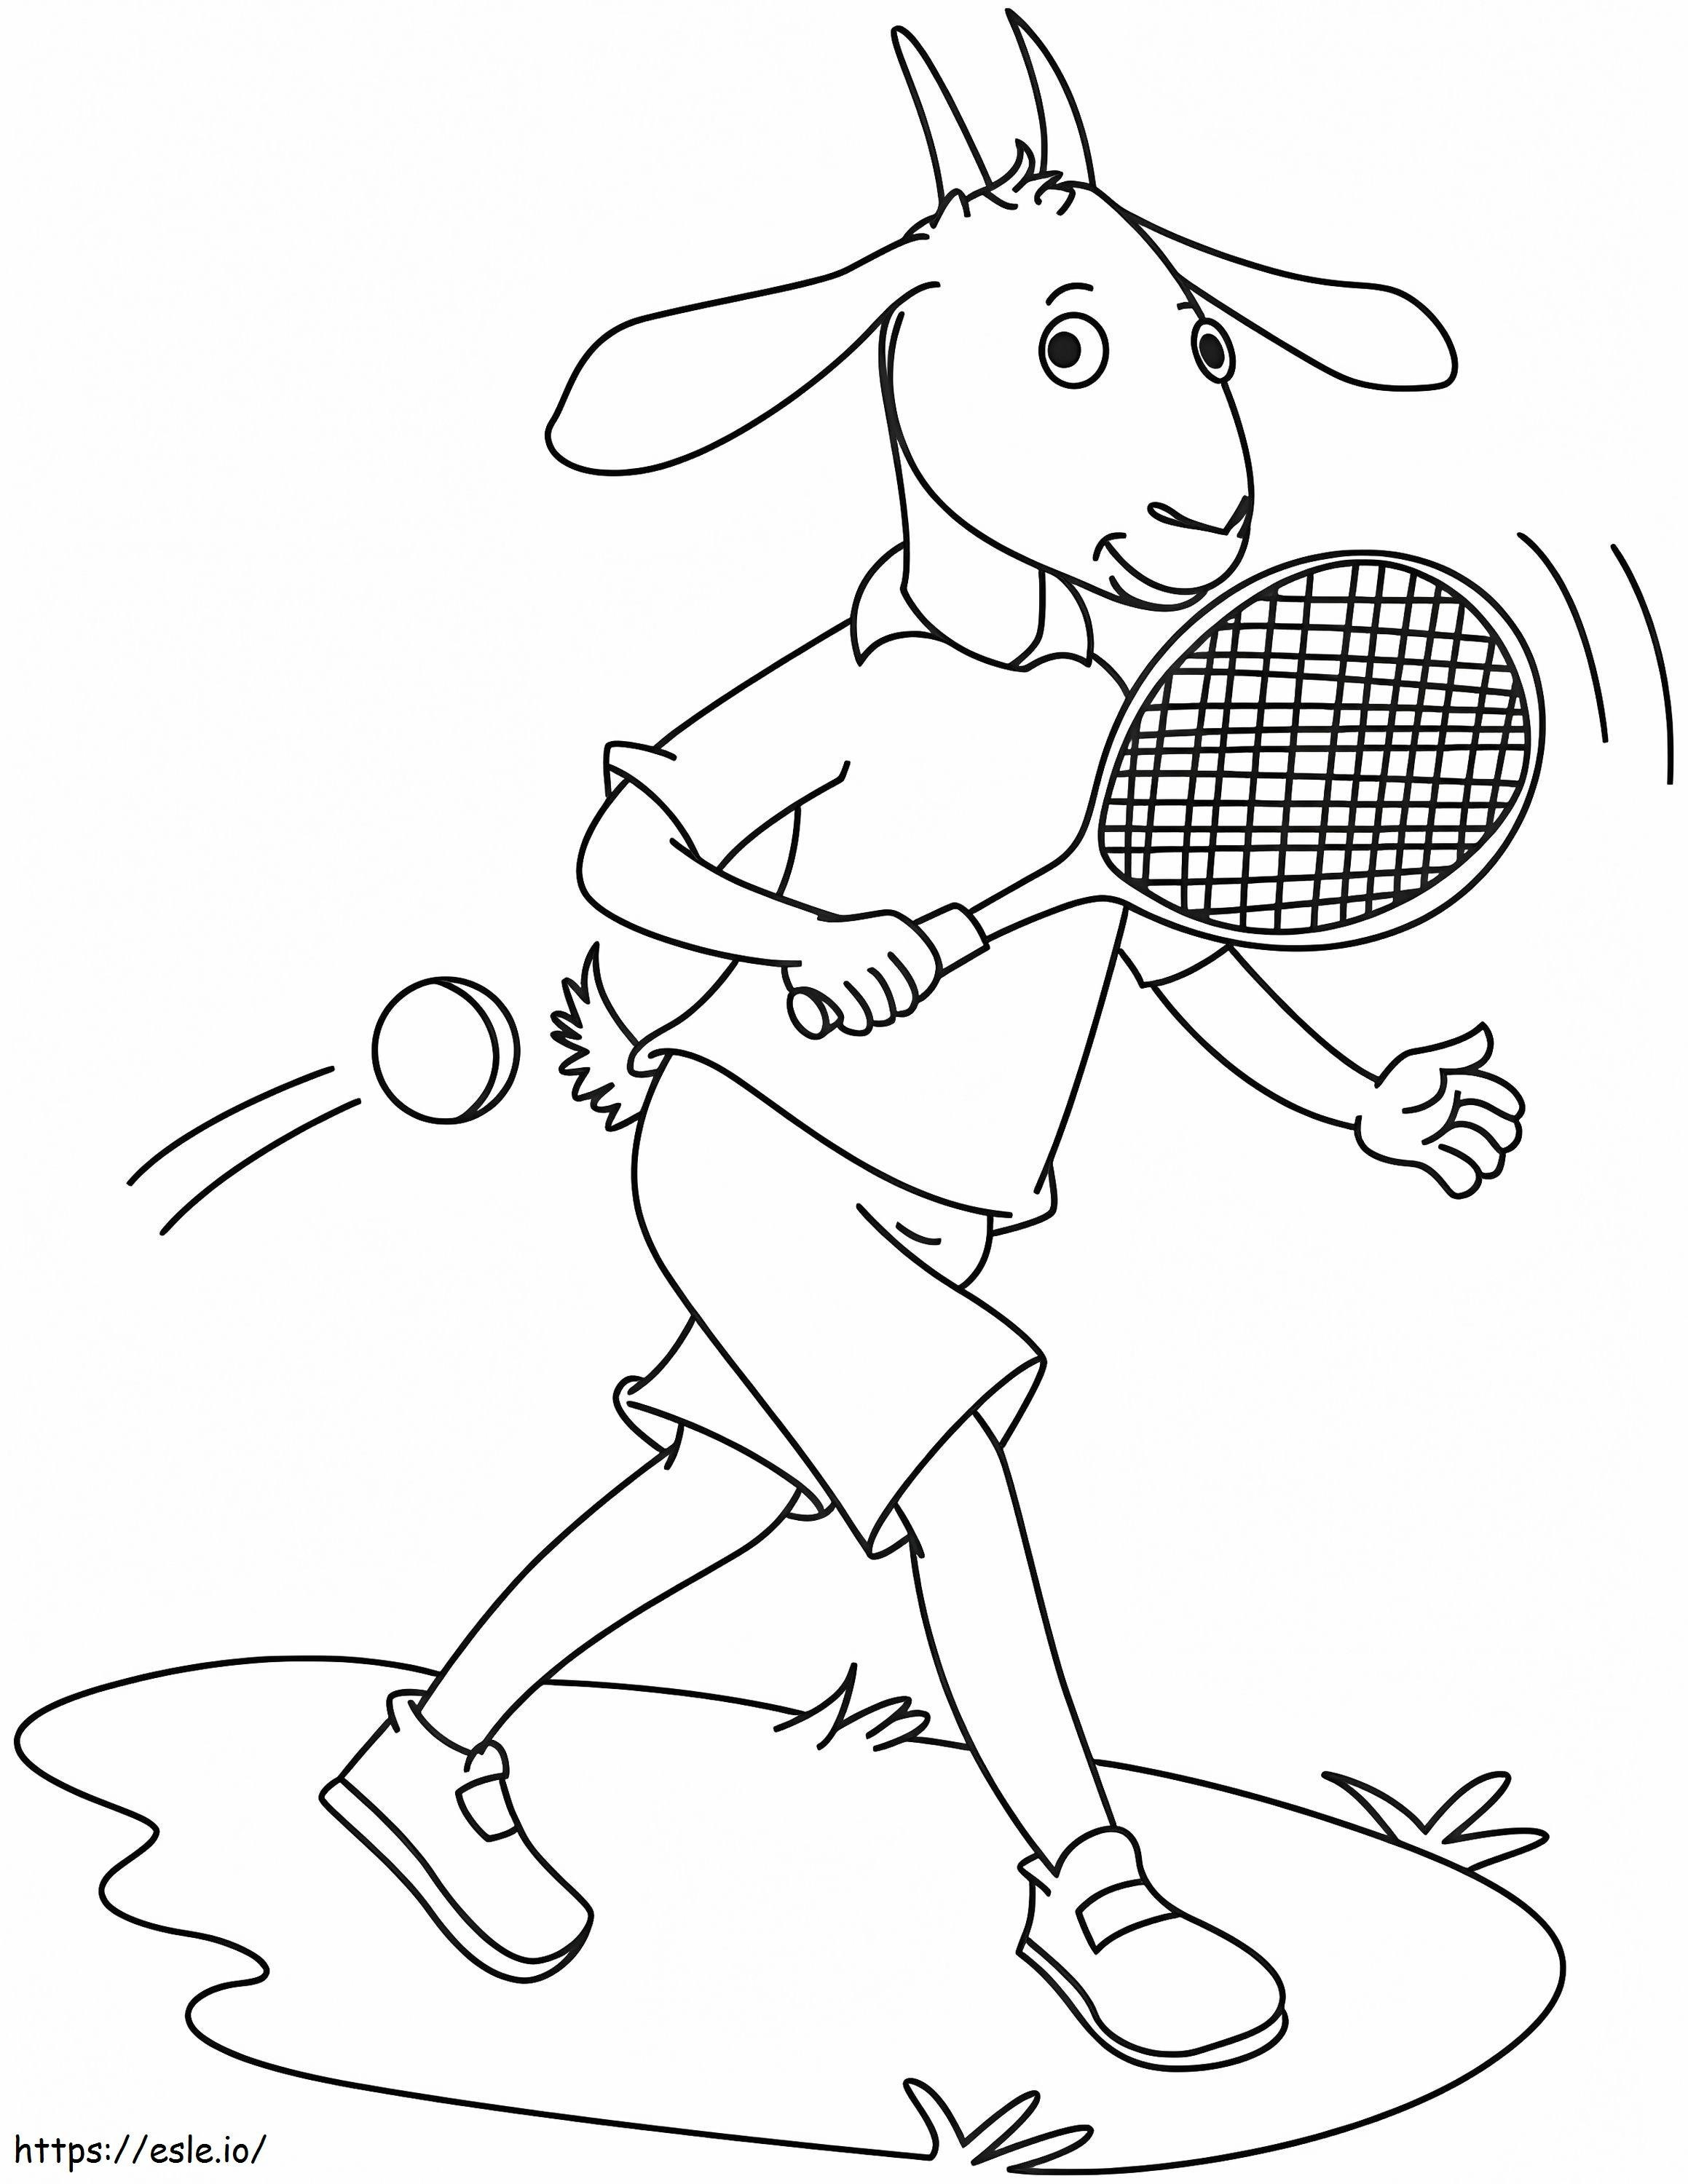 1542094131 Goat Playing Tennis coloring page